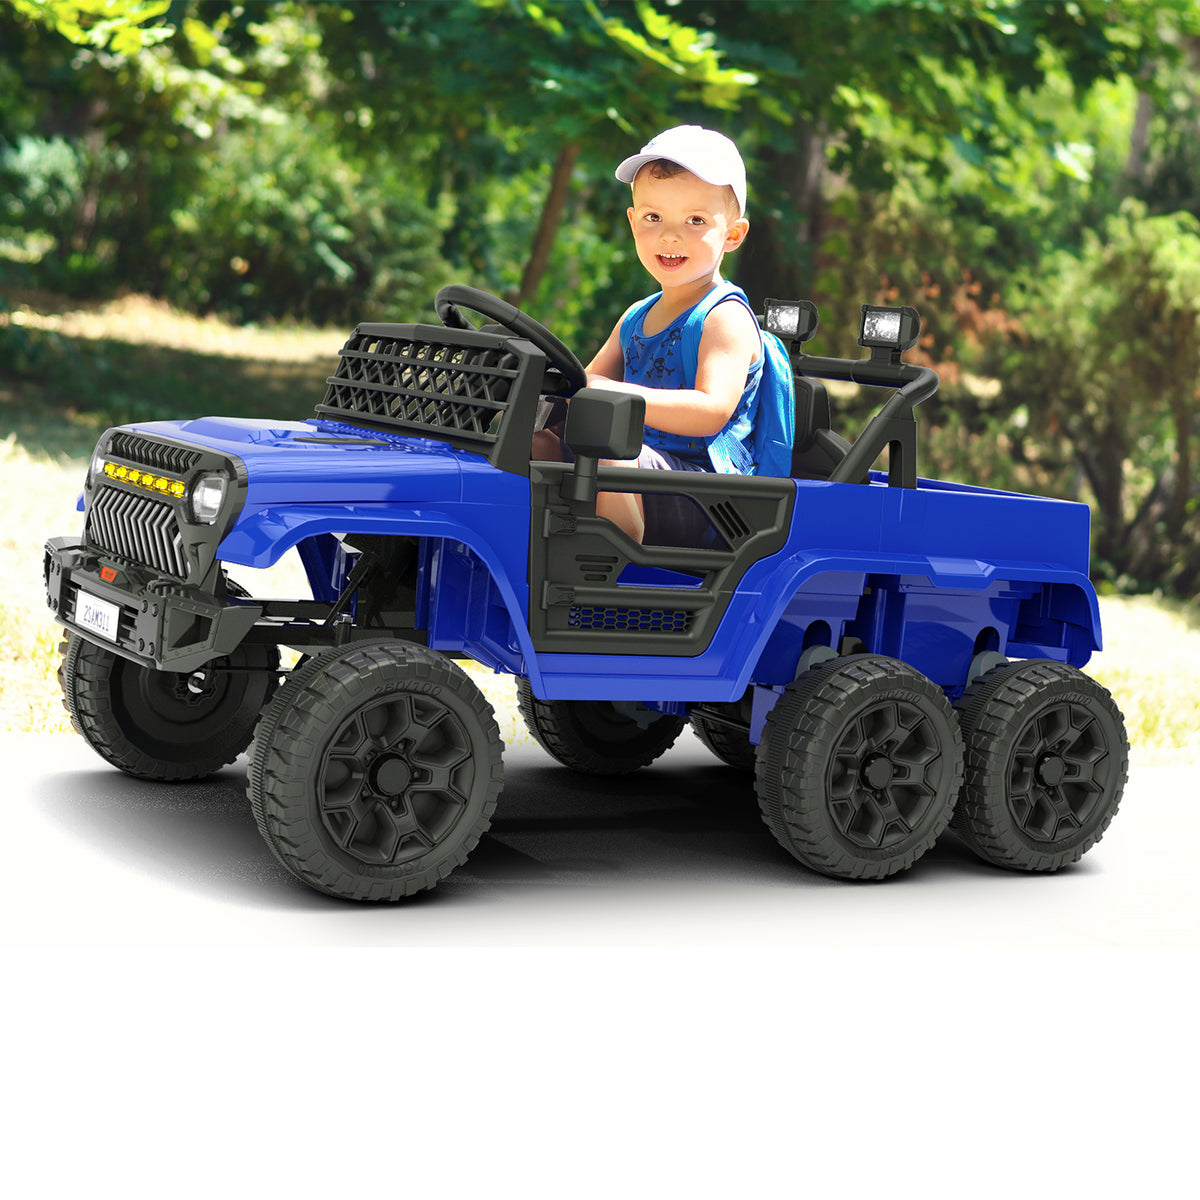 XJD 12V 7AH Ride On Truck Car with Remote Control, 6 Wheels, 2 Seats, Power Car for Kids, Blue